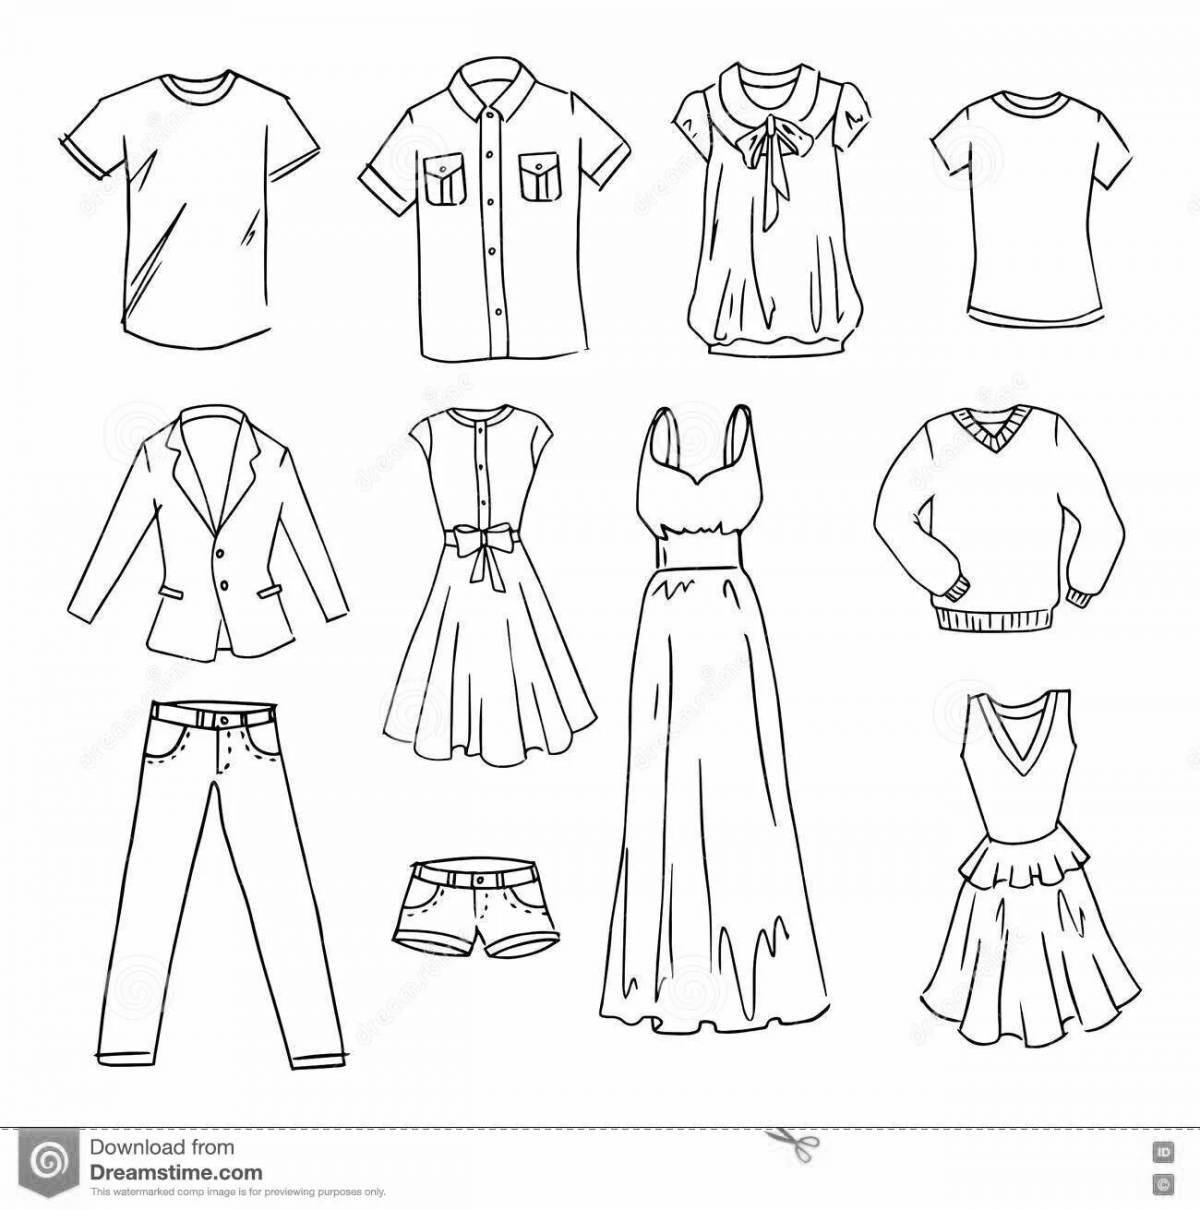 Types of clothing #16